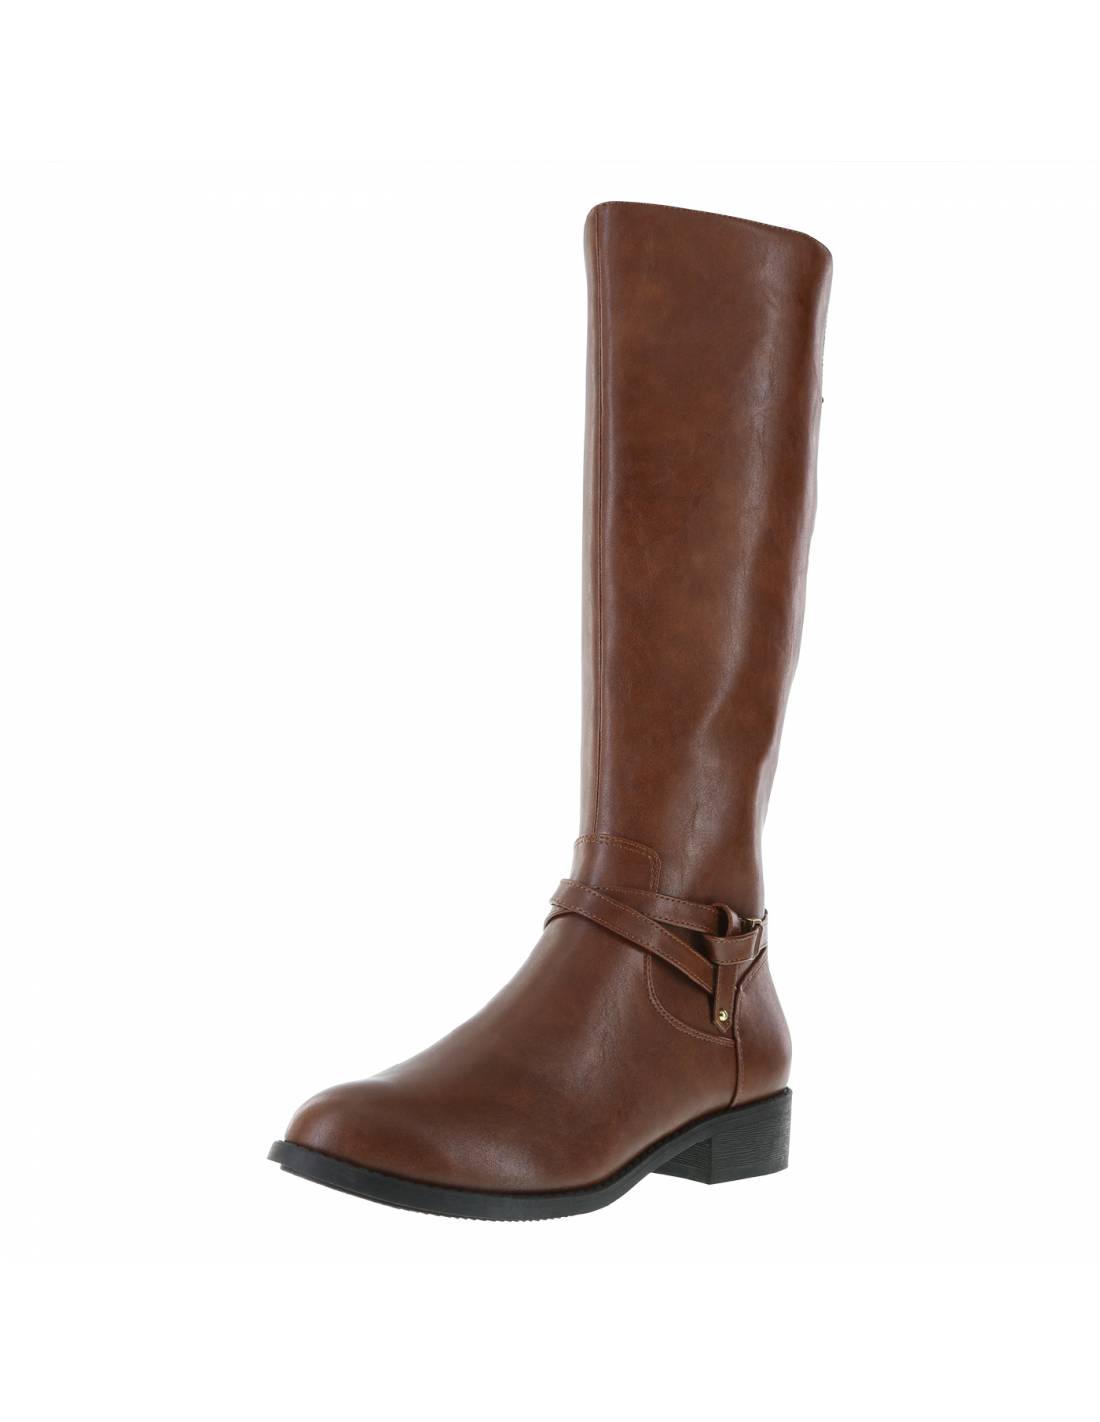 payless cowboy boots womens